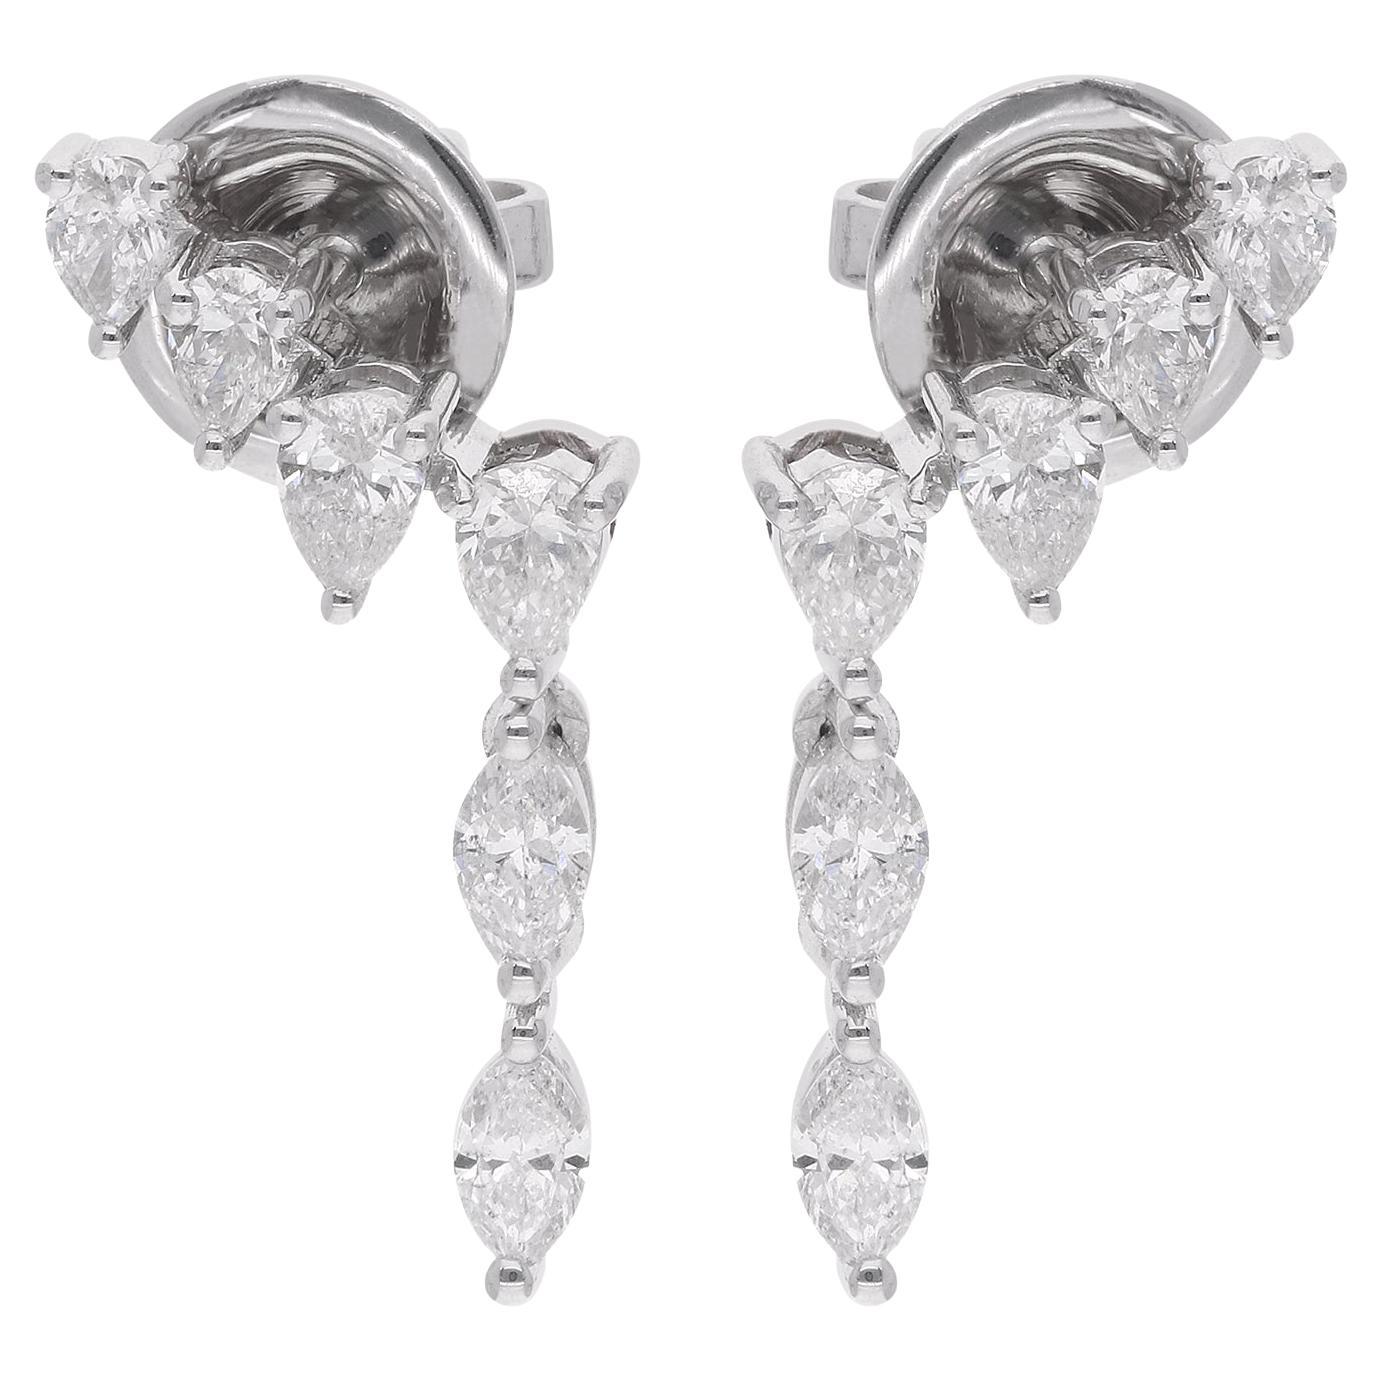 Earrings featuring 0.90 carat pear and marquise diamonds in 18 karat white gold are a beautiful and elegant piece of handmade fine jewelry. Each earring showcases a combination of pear-shaped and marquise-shaped diamonds.

The pear-shaped diamond is